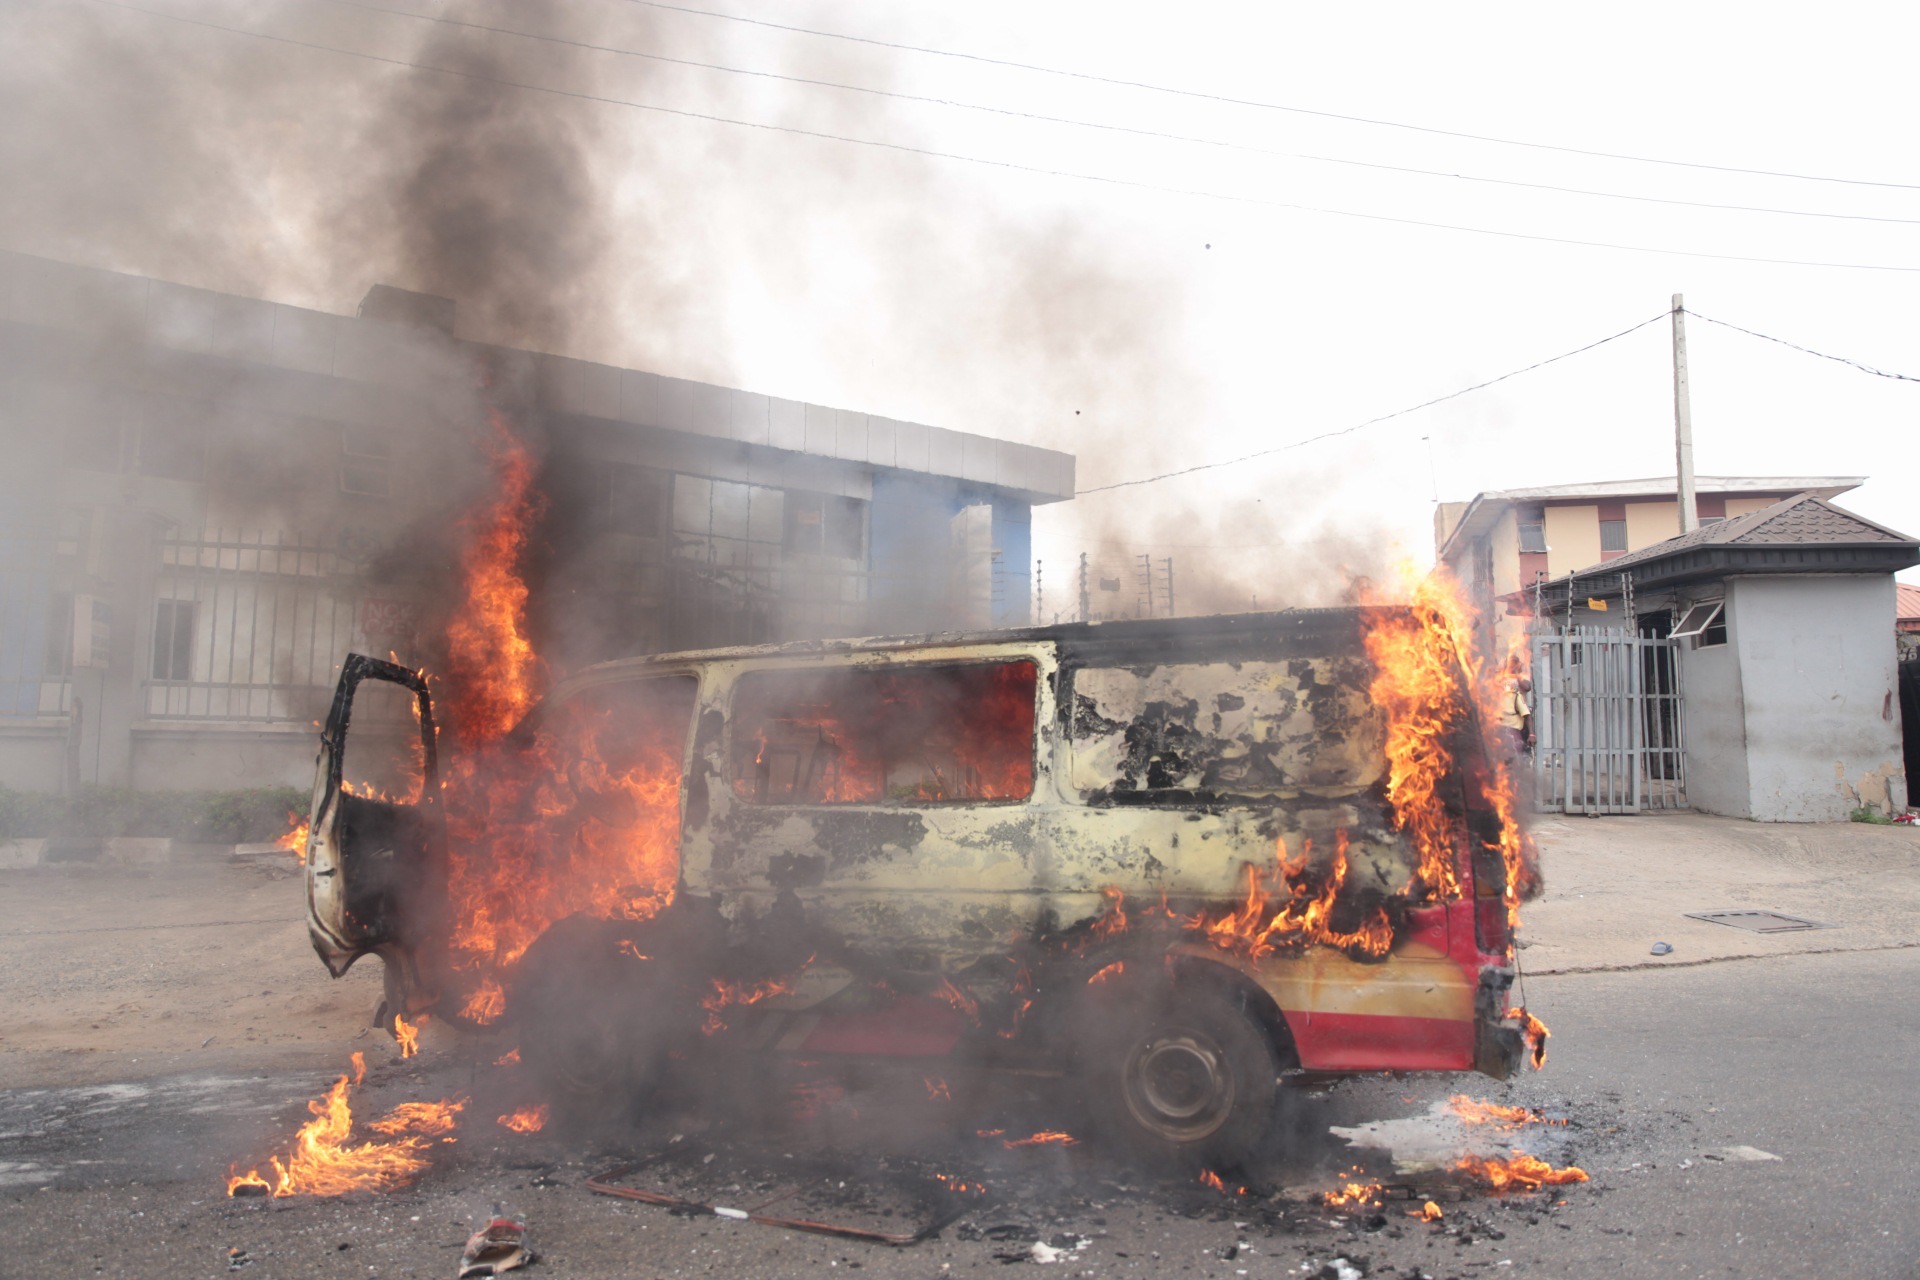 A bus set ablaze by the students